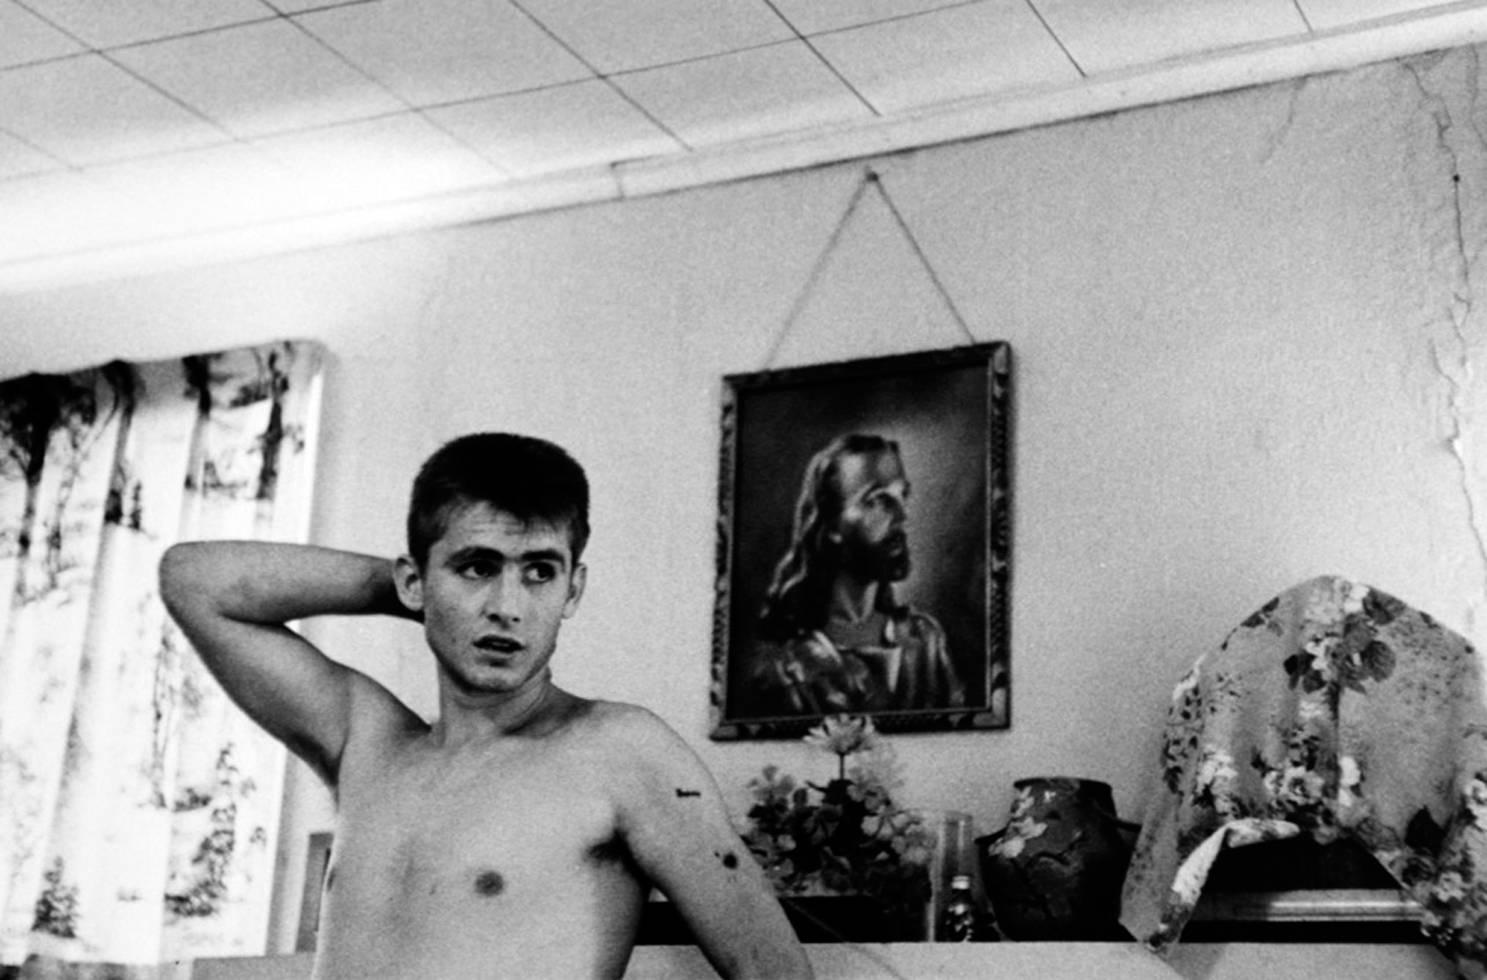 Larry Clark Black and White Photograph - Untitled (David in Front of Mantle, from the series "Tulsa")